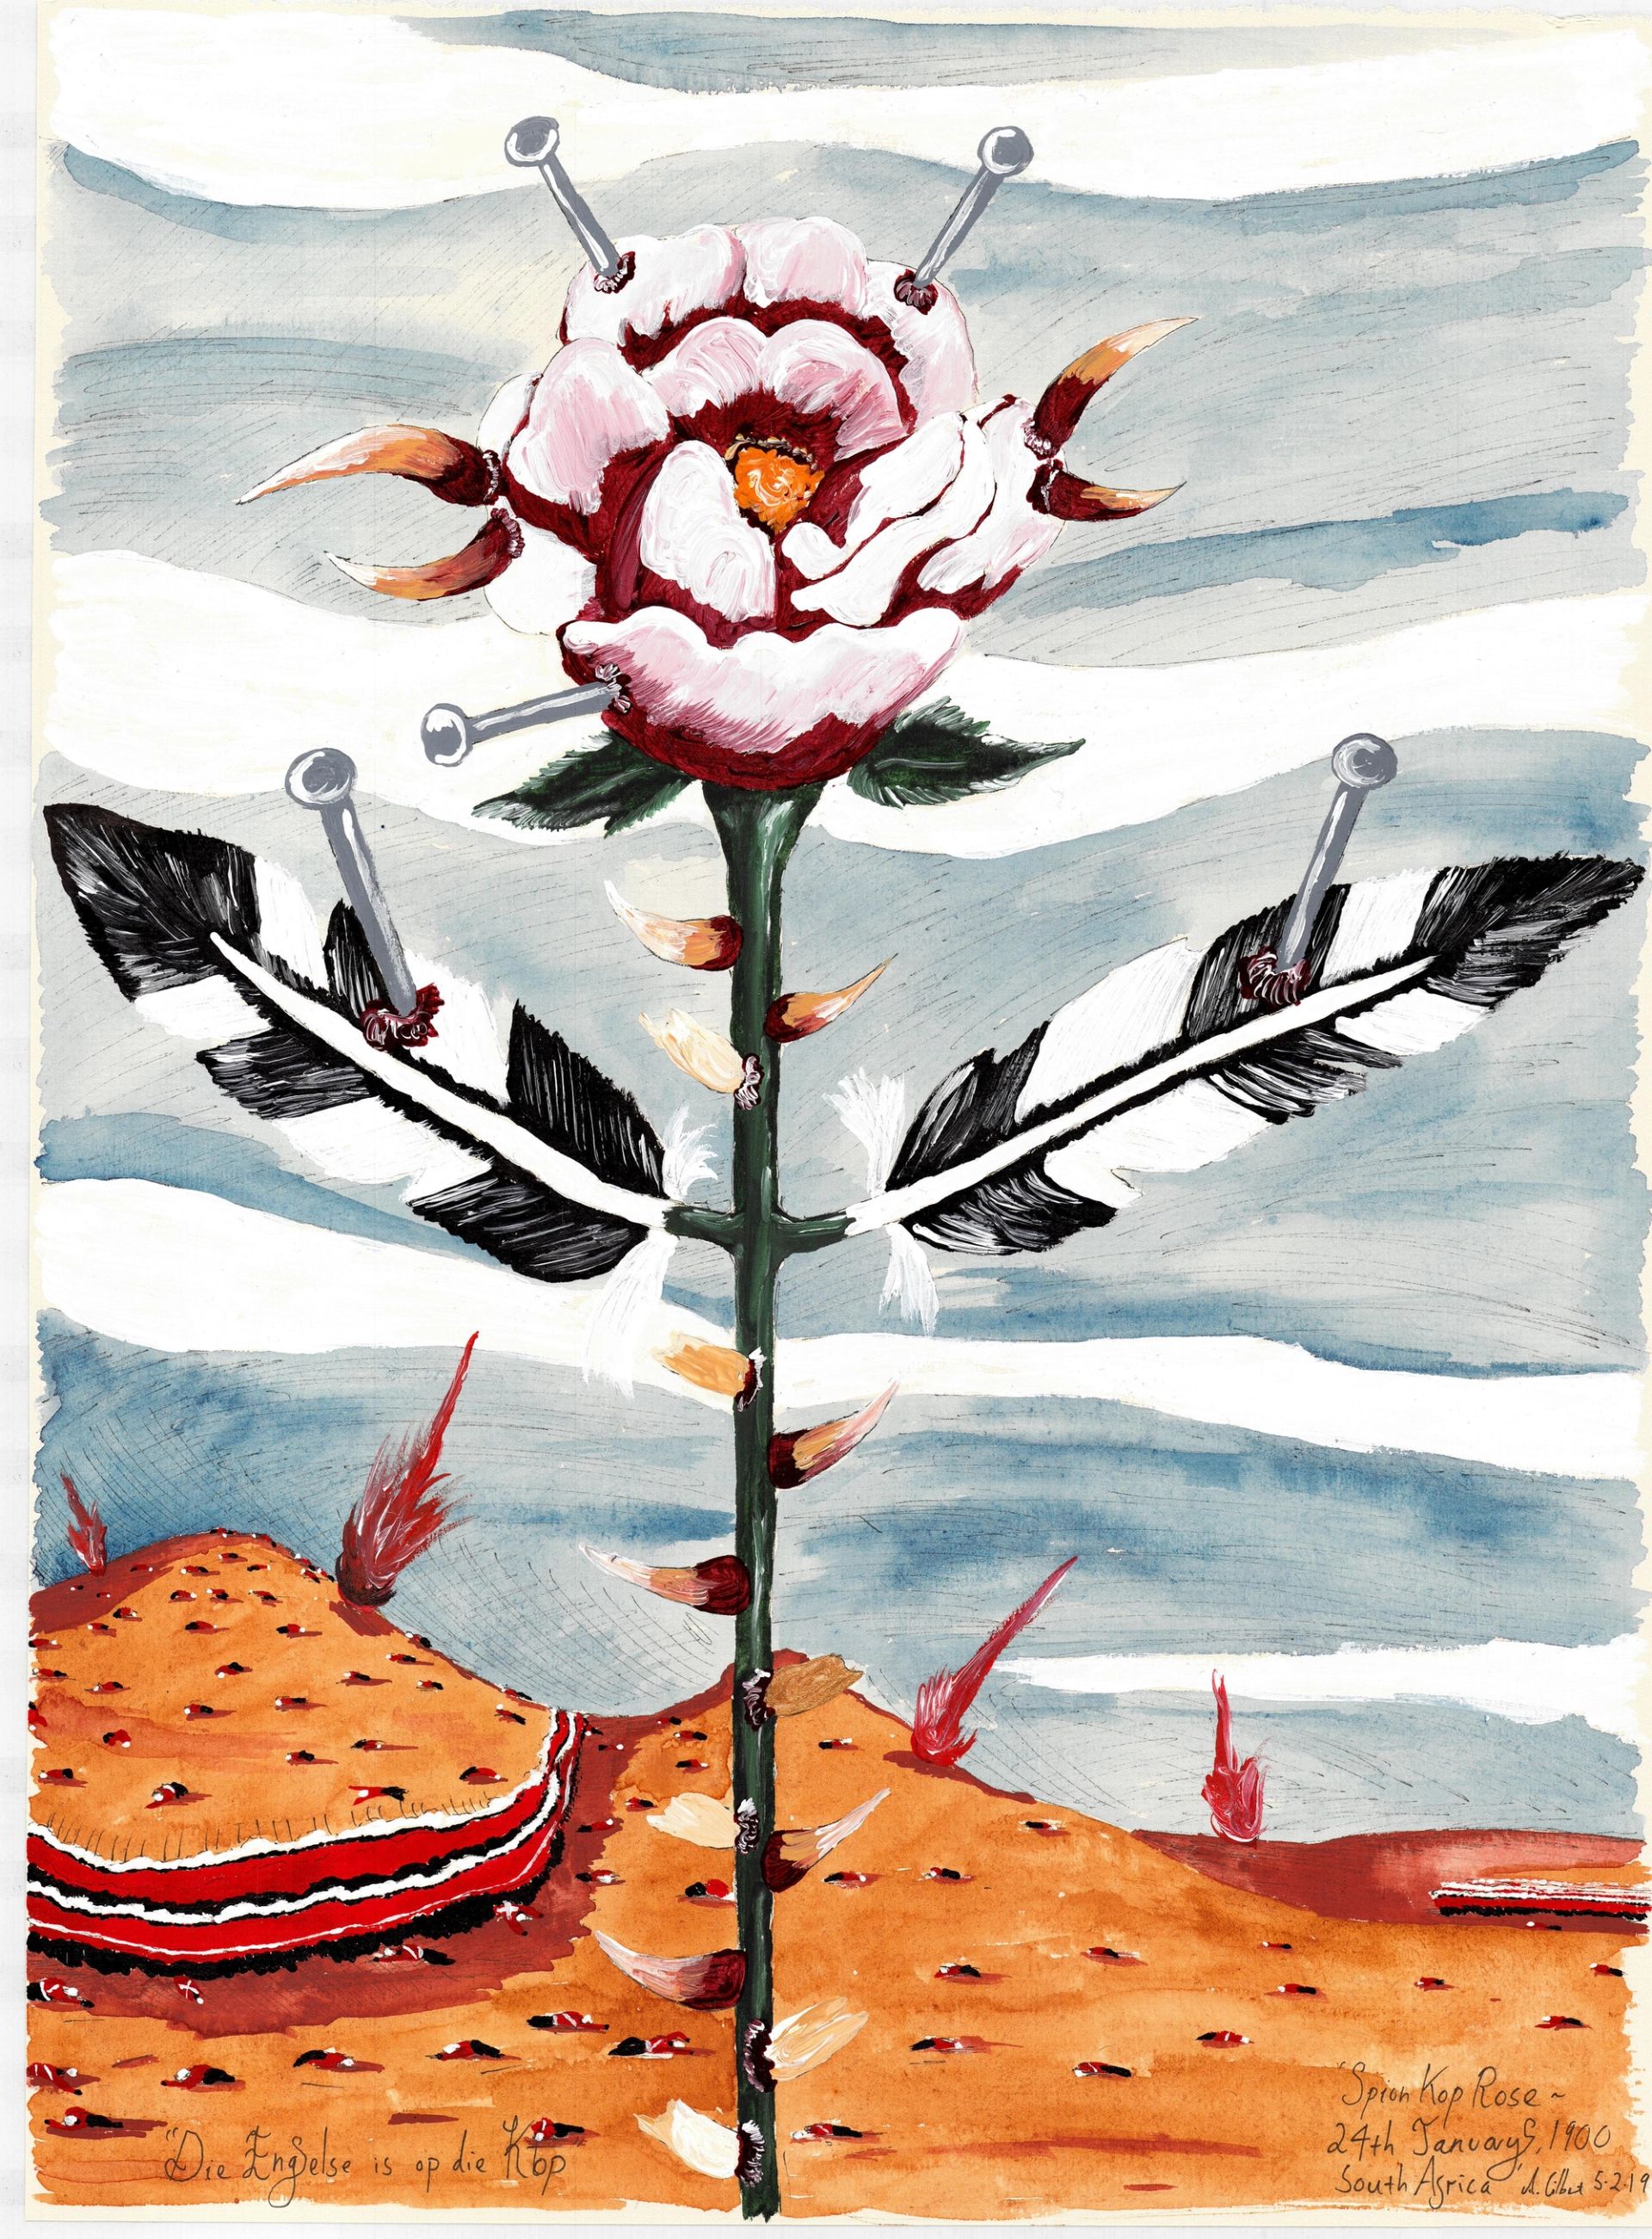 Andrew Gilbert, 'Spion Kop Rose – 24th January, 1900 South Africa', 2019
acrylic, watercolor and fineliner on paper, 40 × 30 cm